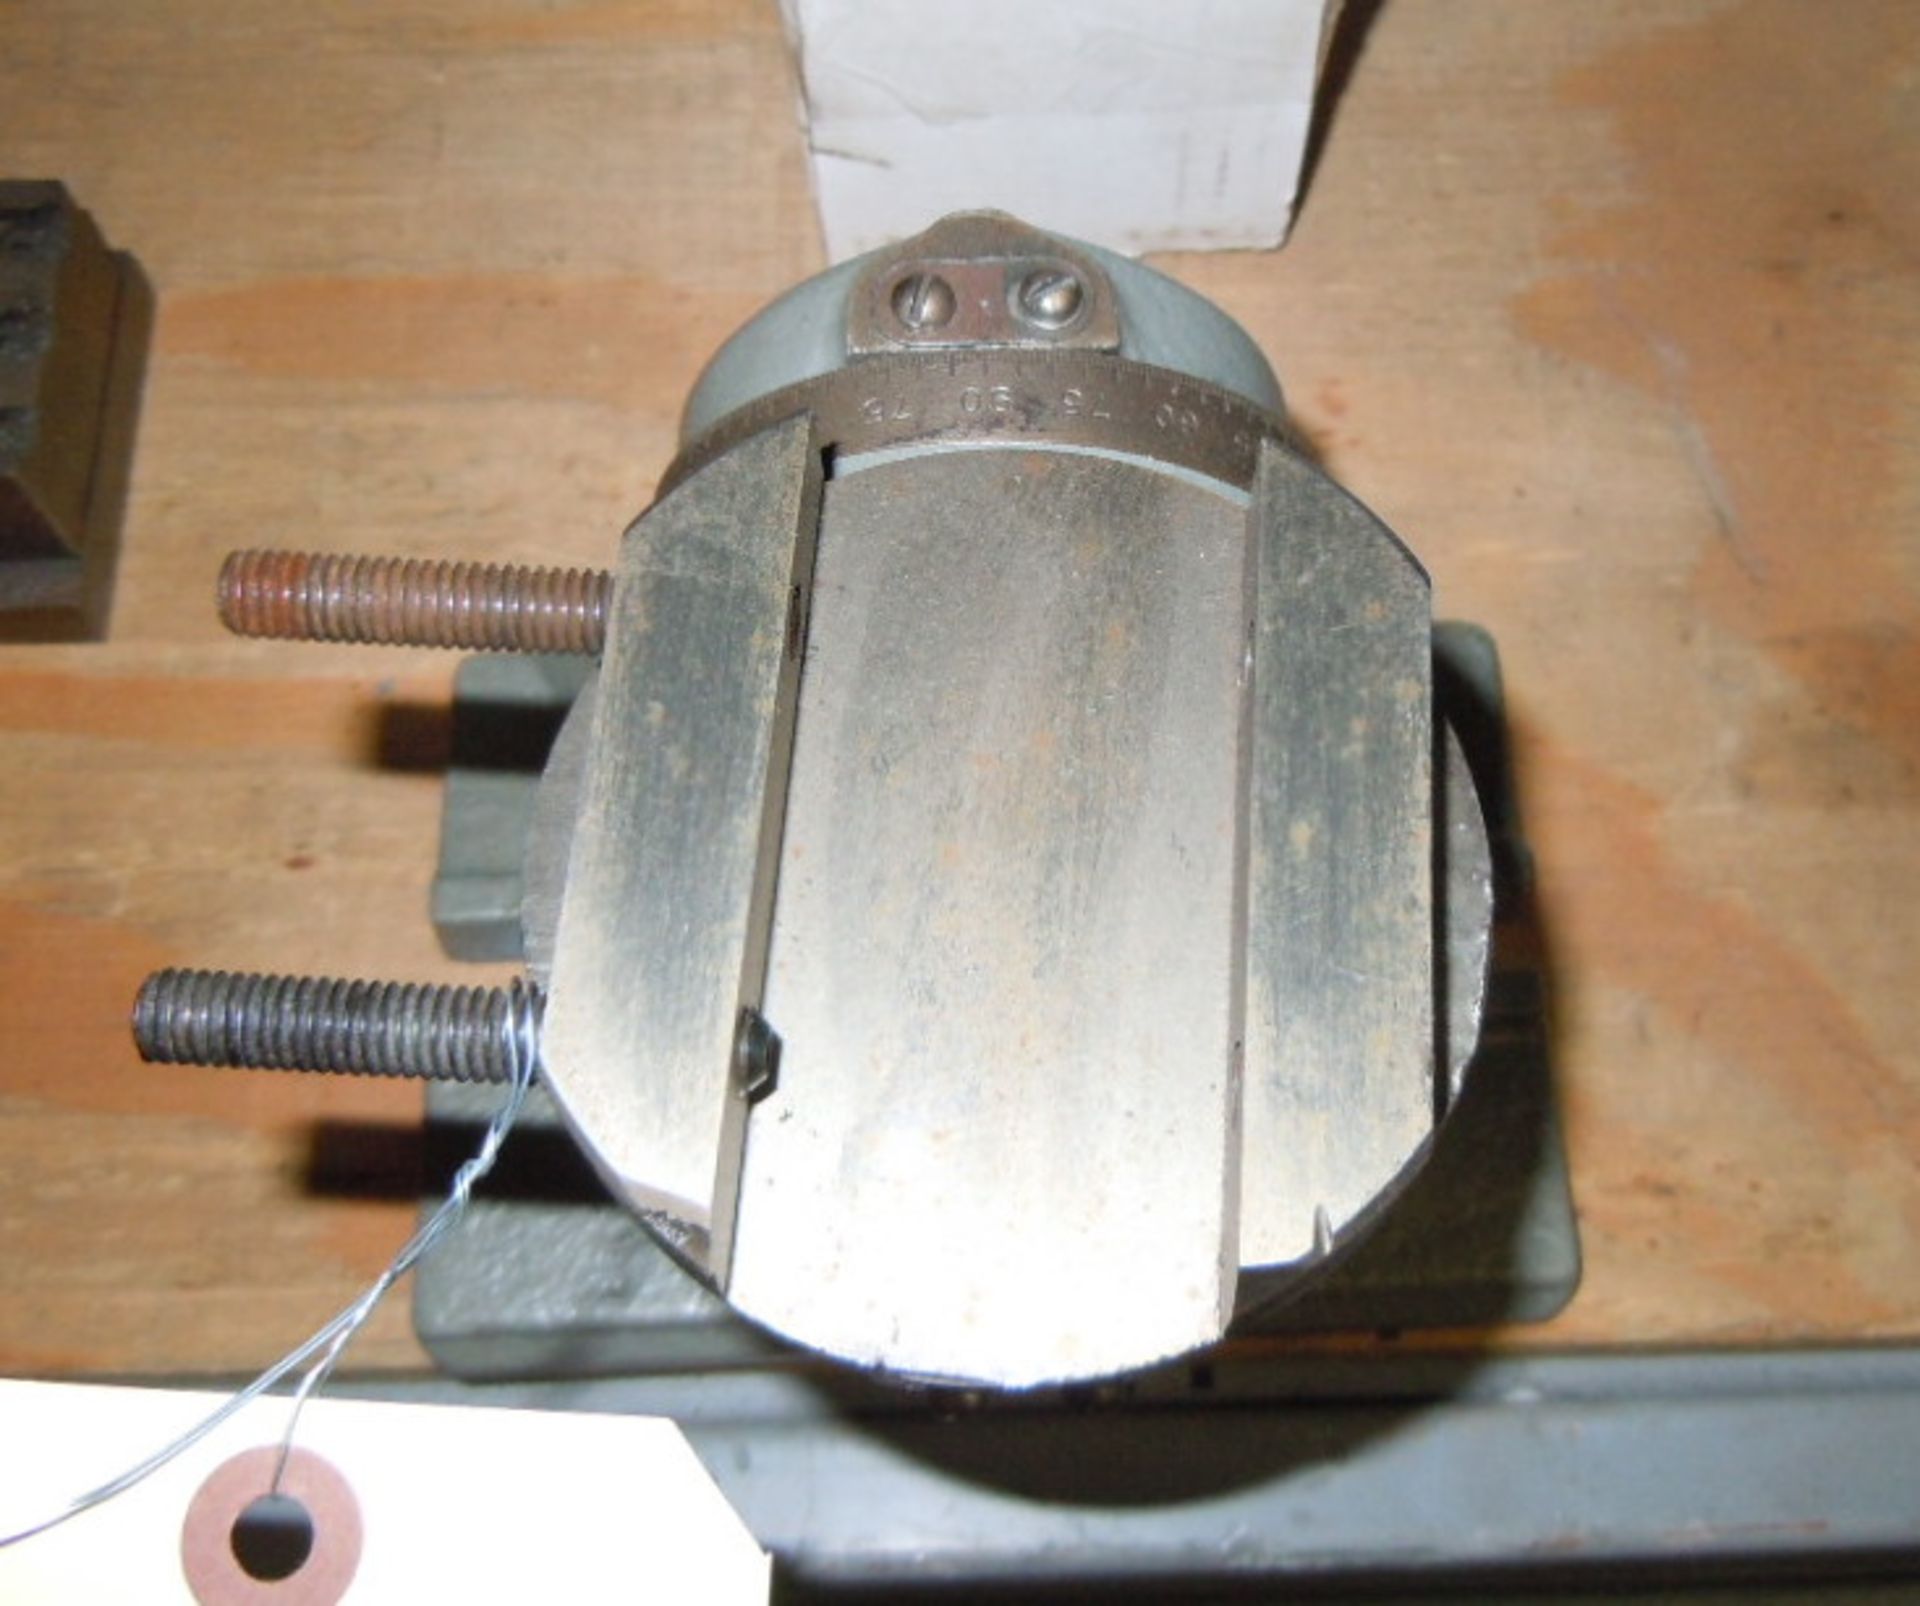 Univise Compound Grinding Fixture - Image 3 of 3